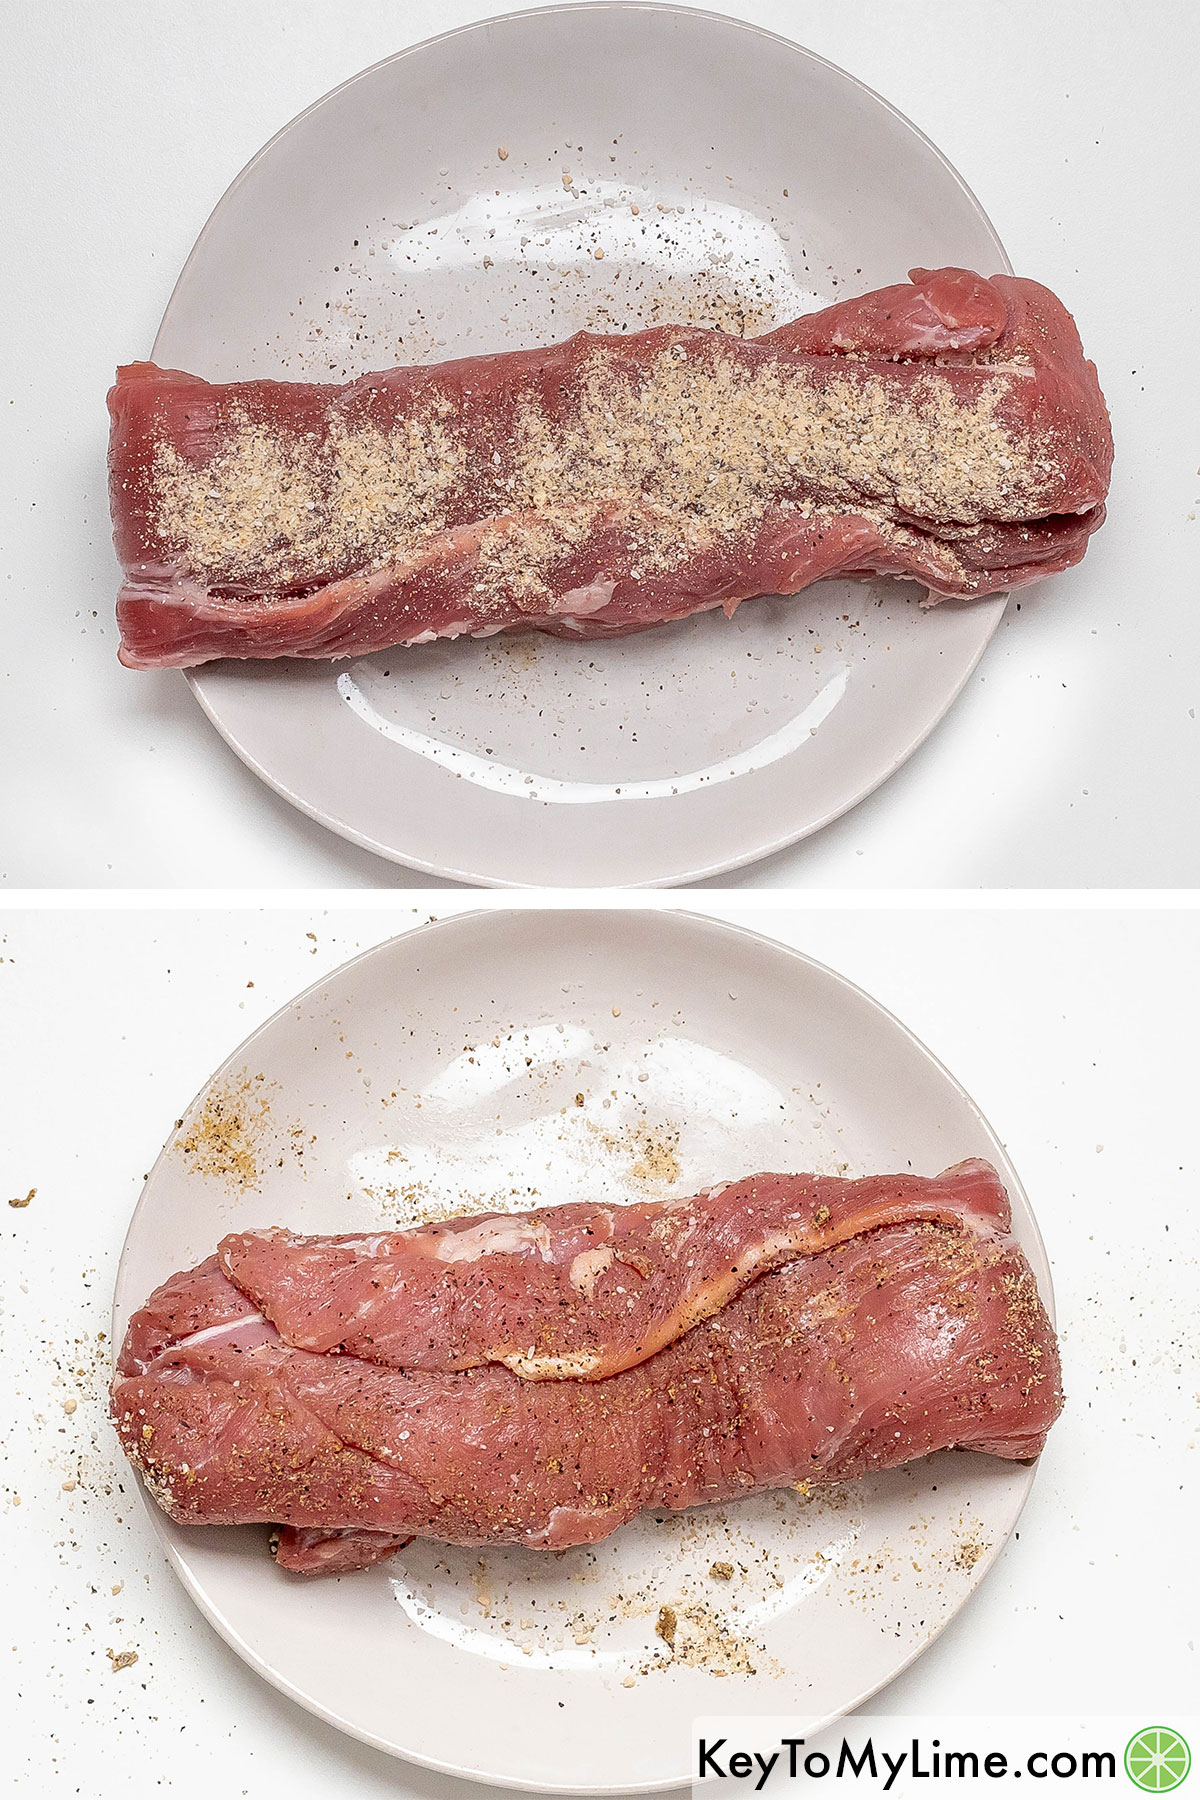 Applying the dry rub to the tenderloin, and then folding for even cooking.